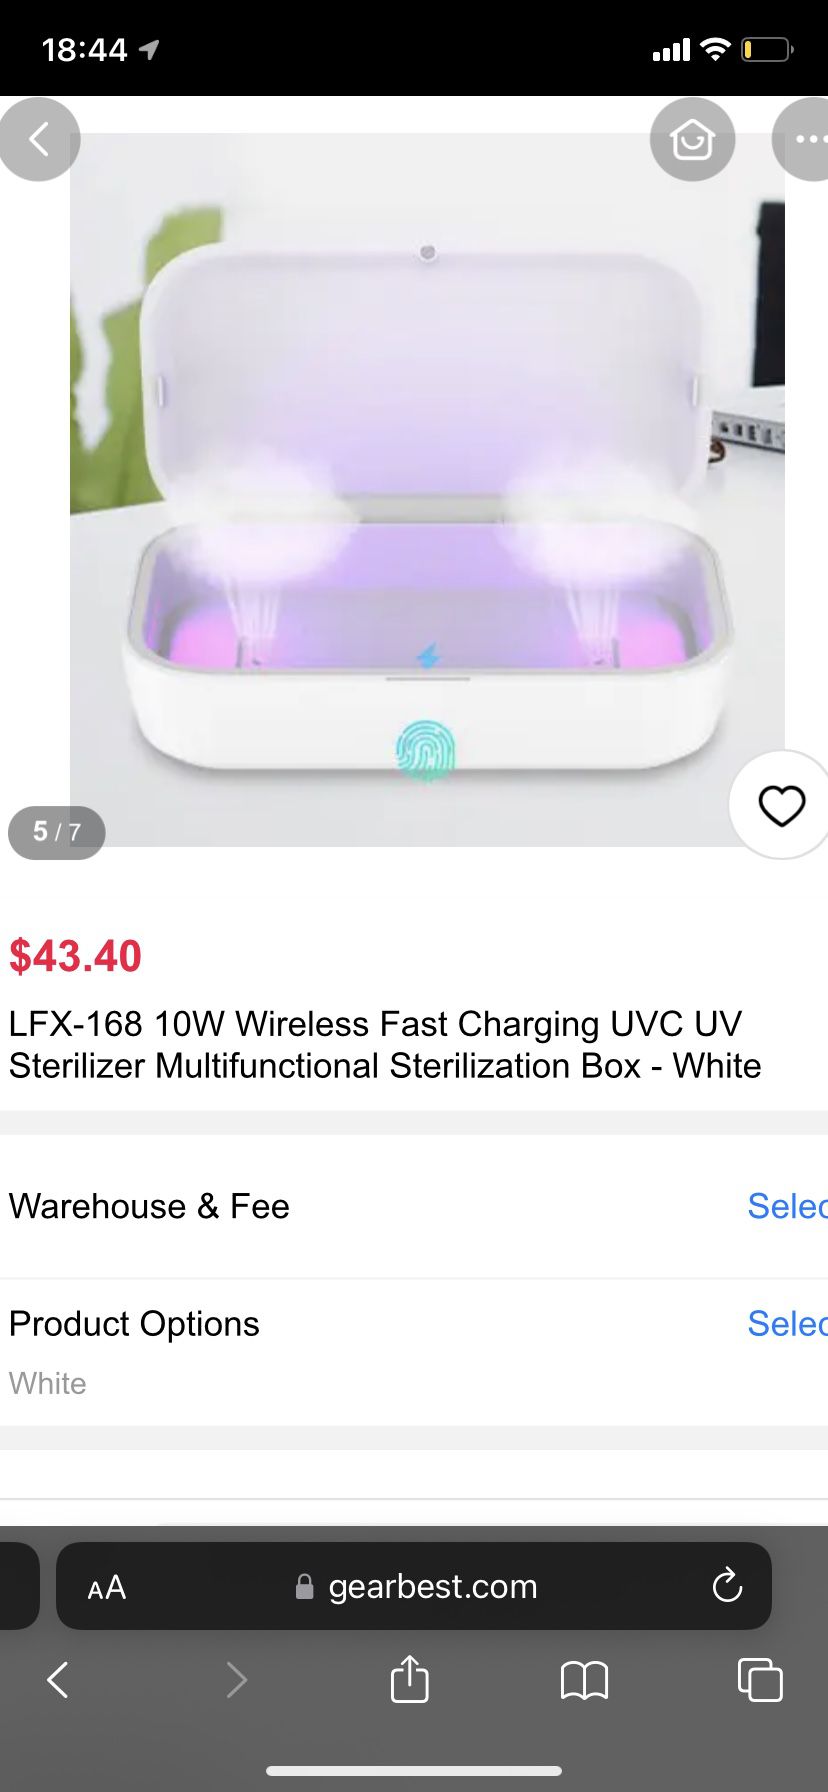 Wireless Charger multi functional disinfection box/ OBO/ Price Is Negotiable And Trades Welcome/ 1 For $22 - 2 For $30